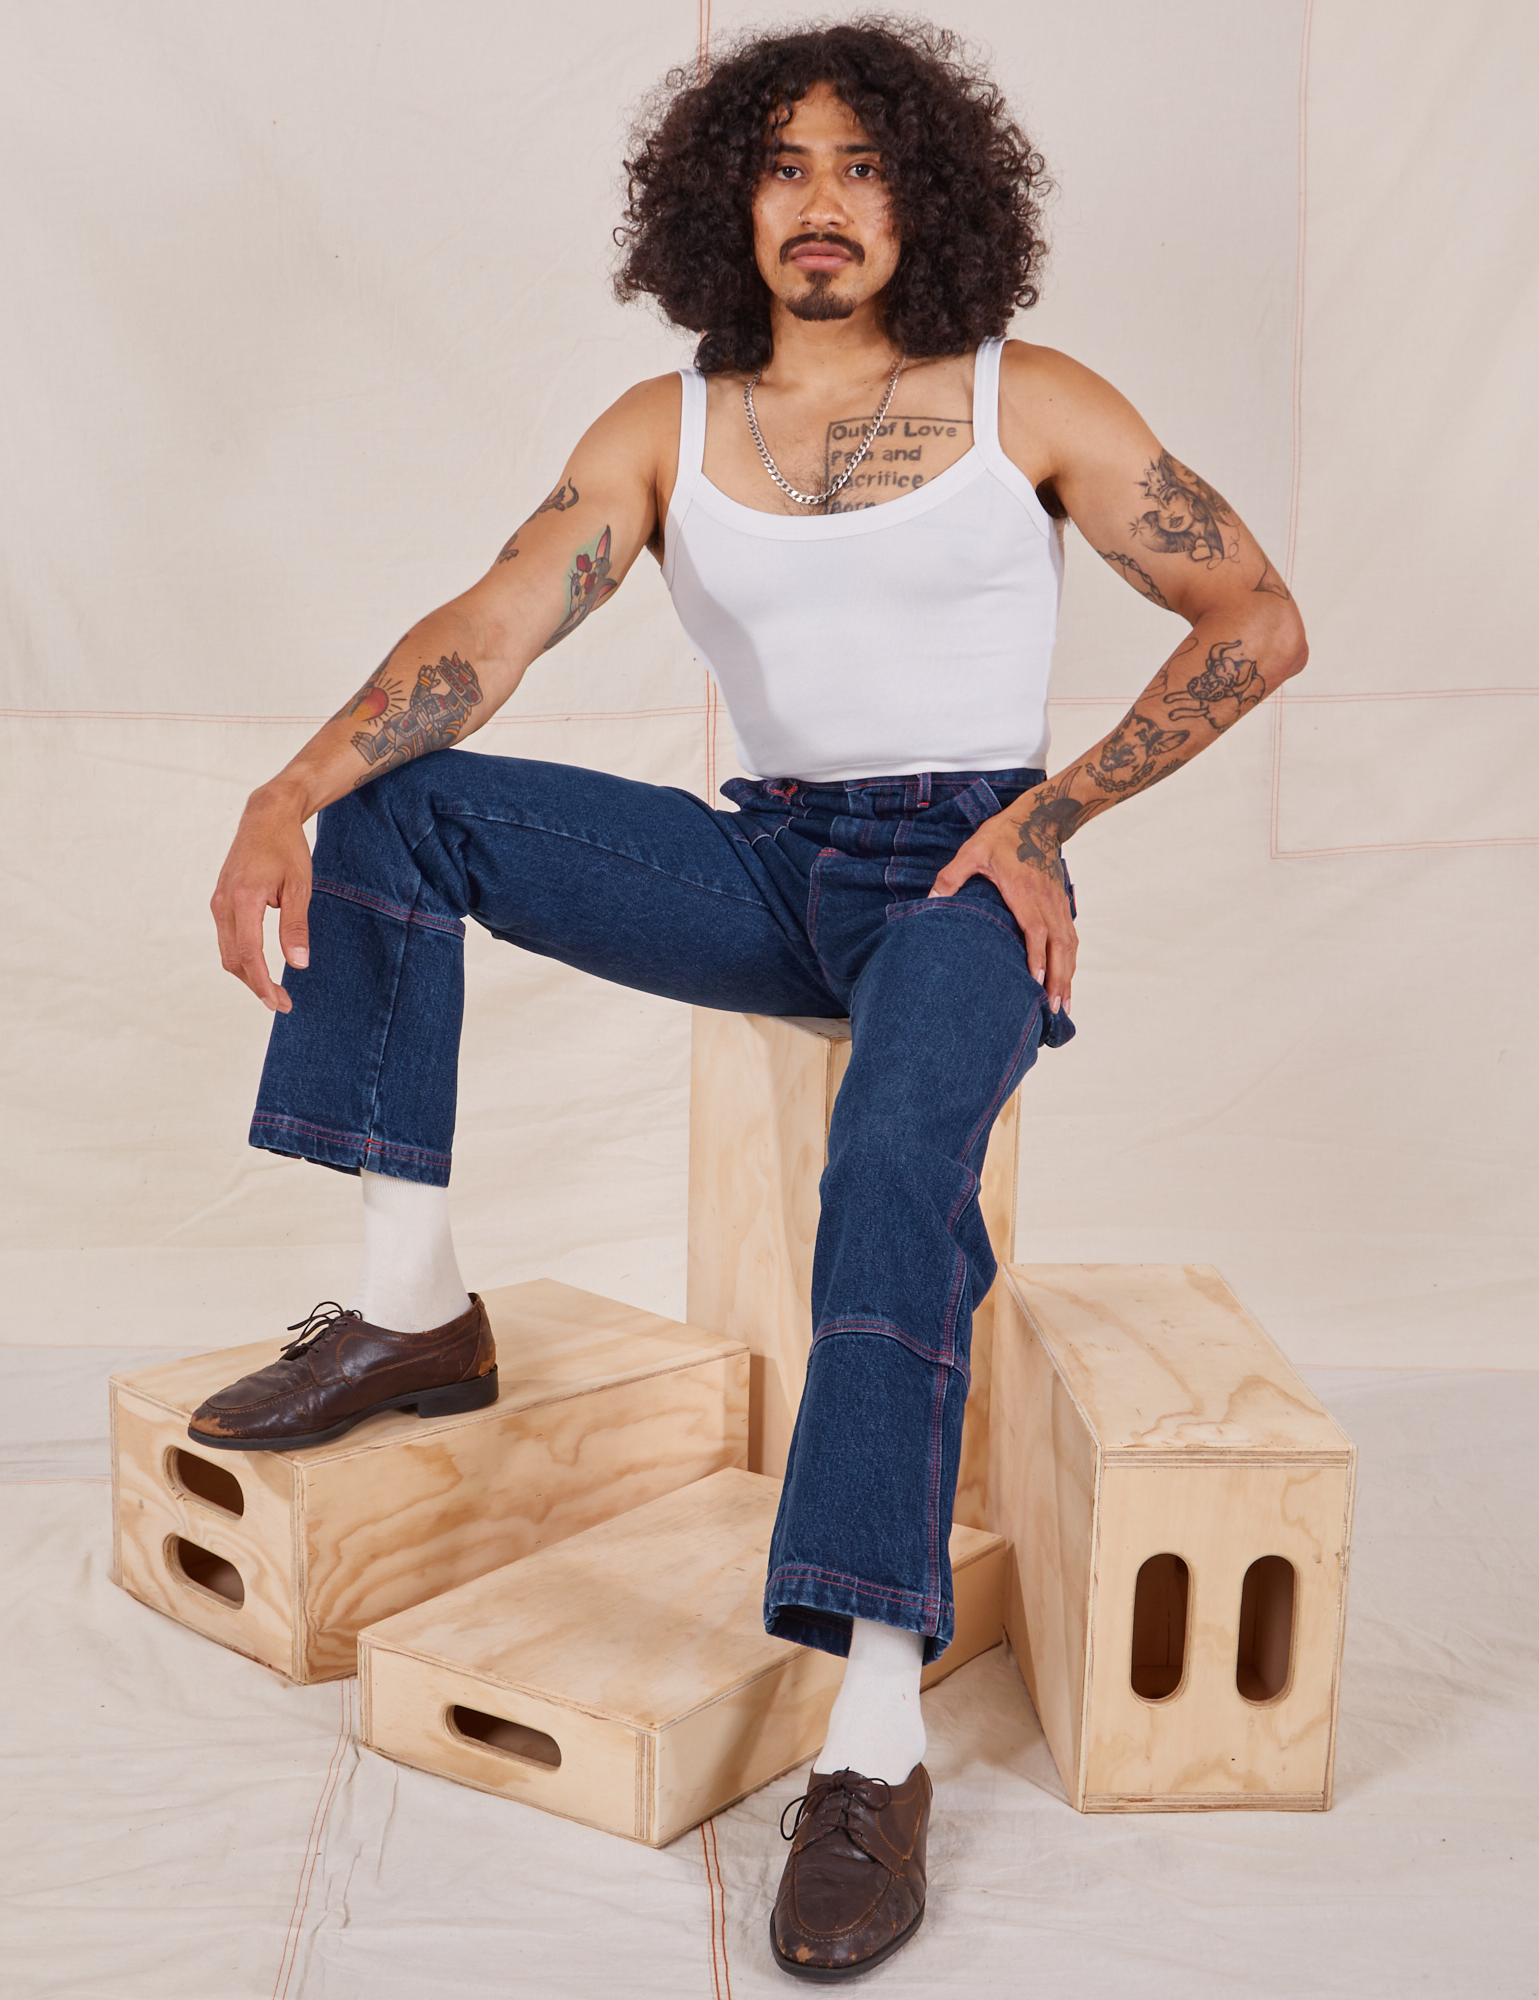 Jesse is sitting on a wooden crate. They are wearing Carpenter Jeans in Dark Wash and Cropped Cami in vintage tee off-white